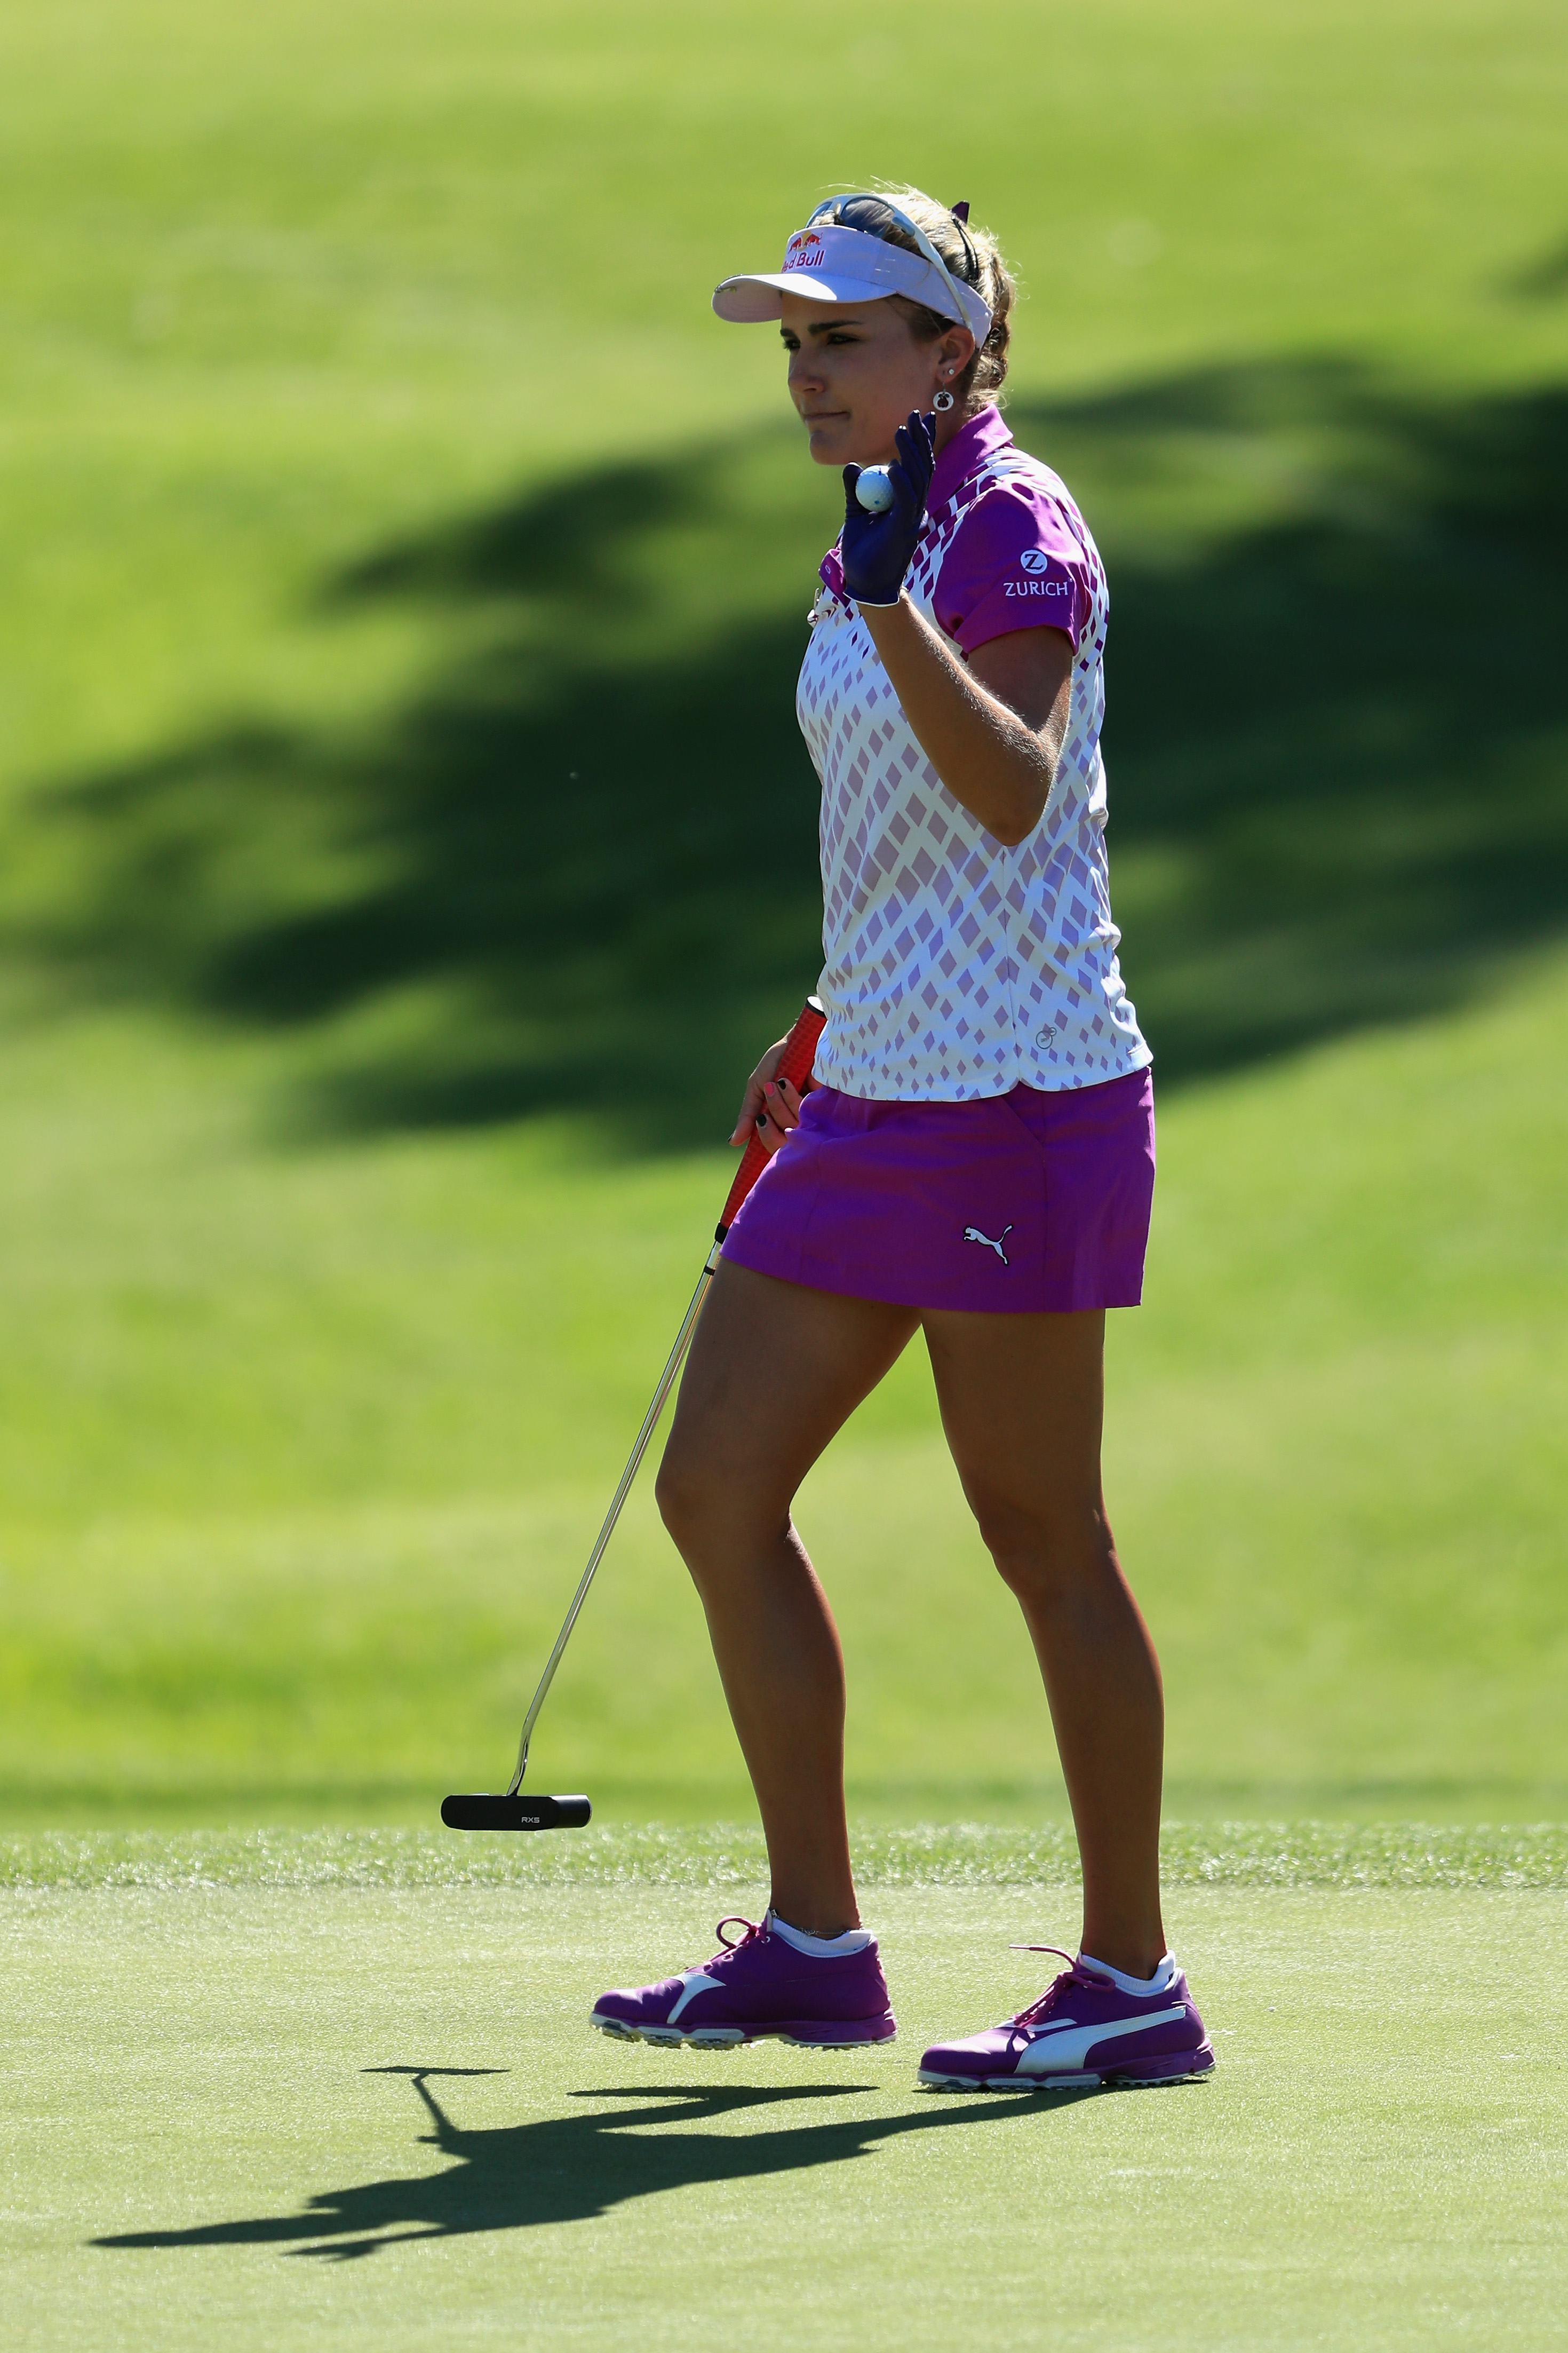 Putter fitting? Lexi Thompson shows why you need to pay attention to i This is the Loop Golf Digest